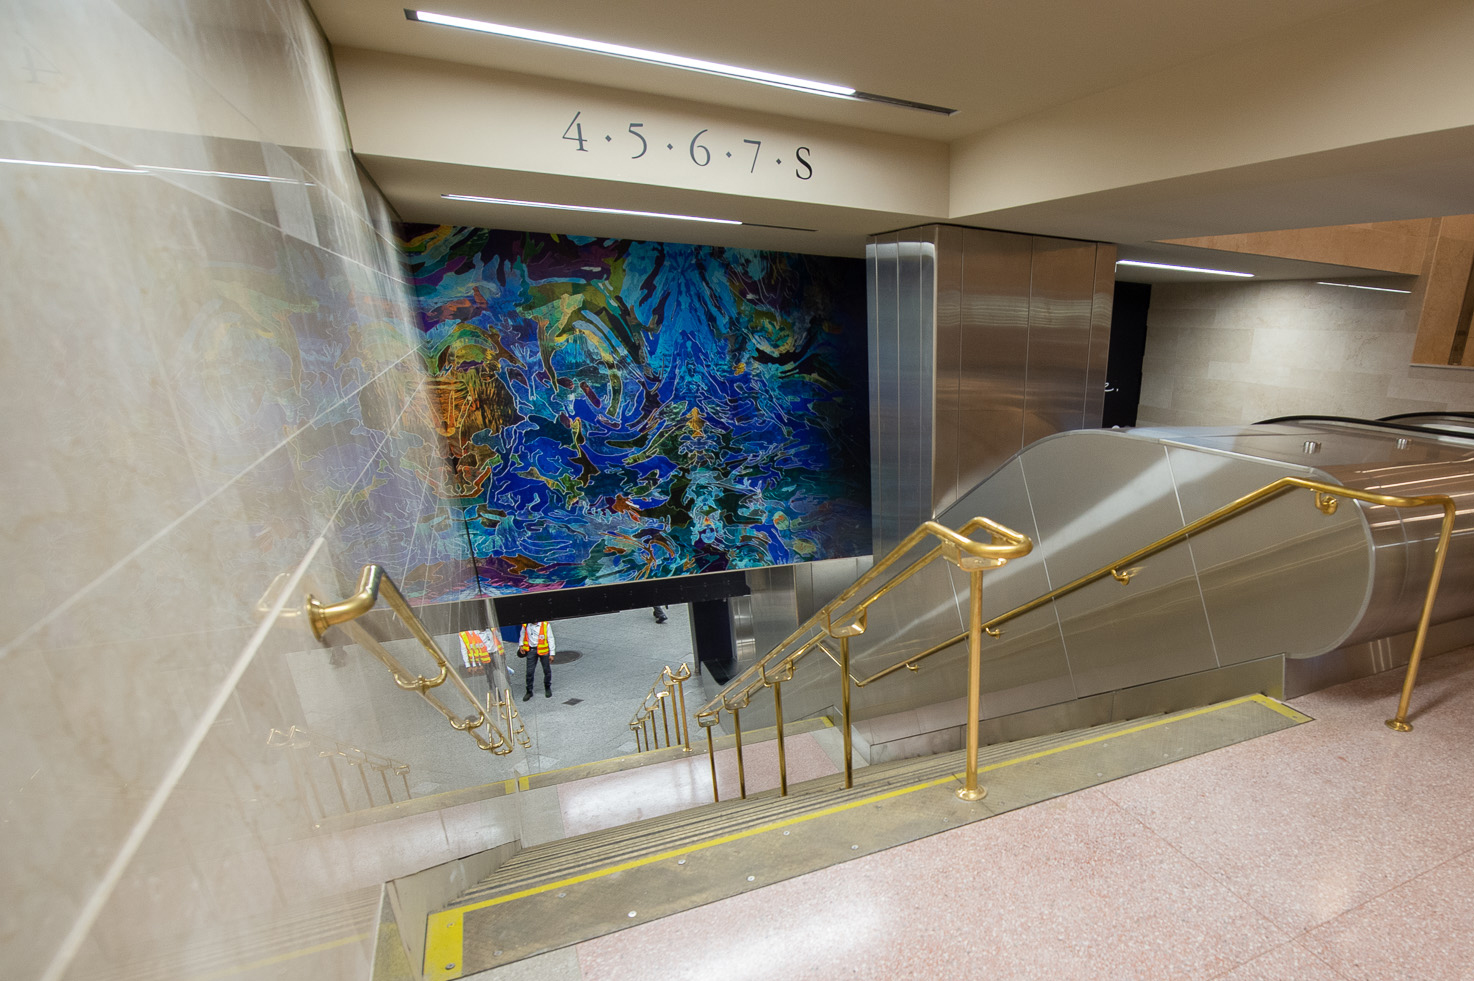 Jim Hodges, MFA Fine Arts ’86, “I dreamed a world and called it Love” (2021) in the Grand Central-42nd Street (4/5/6/7/S) station (photo by the Metropolitan Transportation Authority/Flickr)